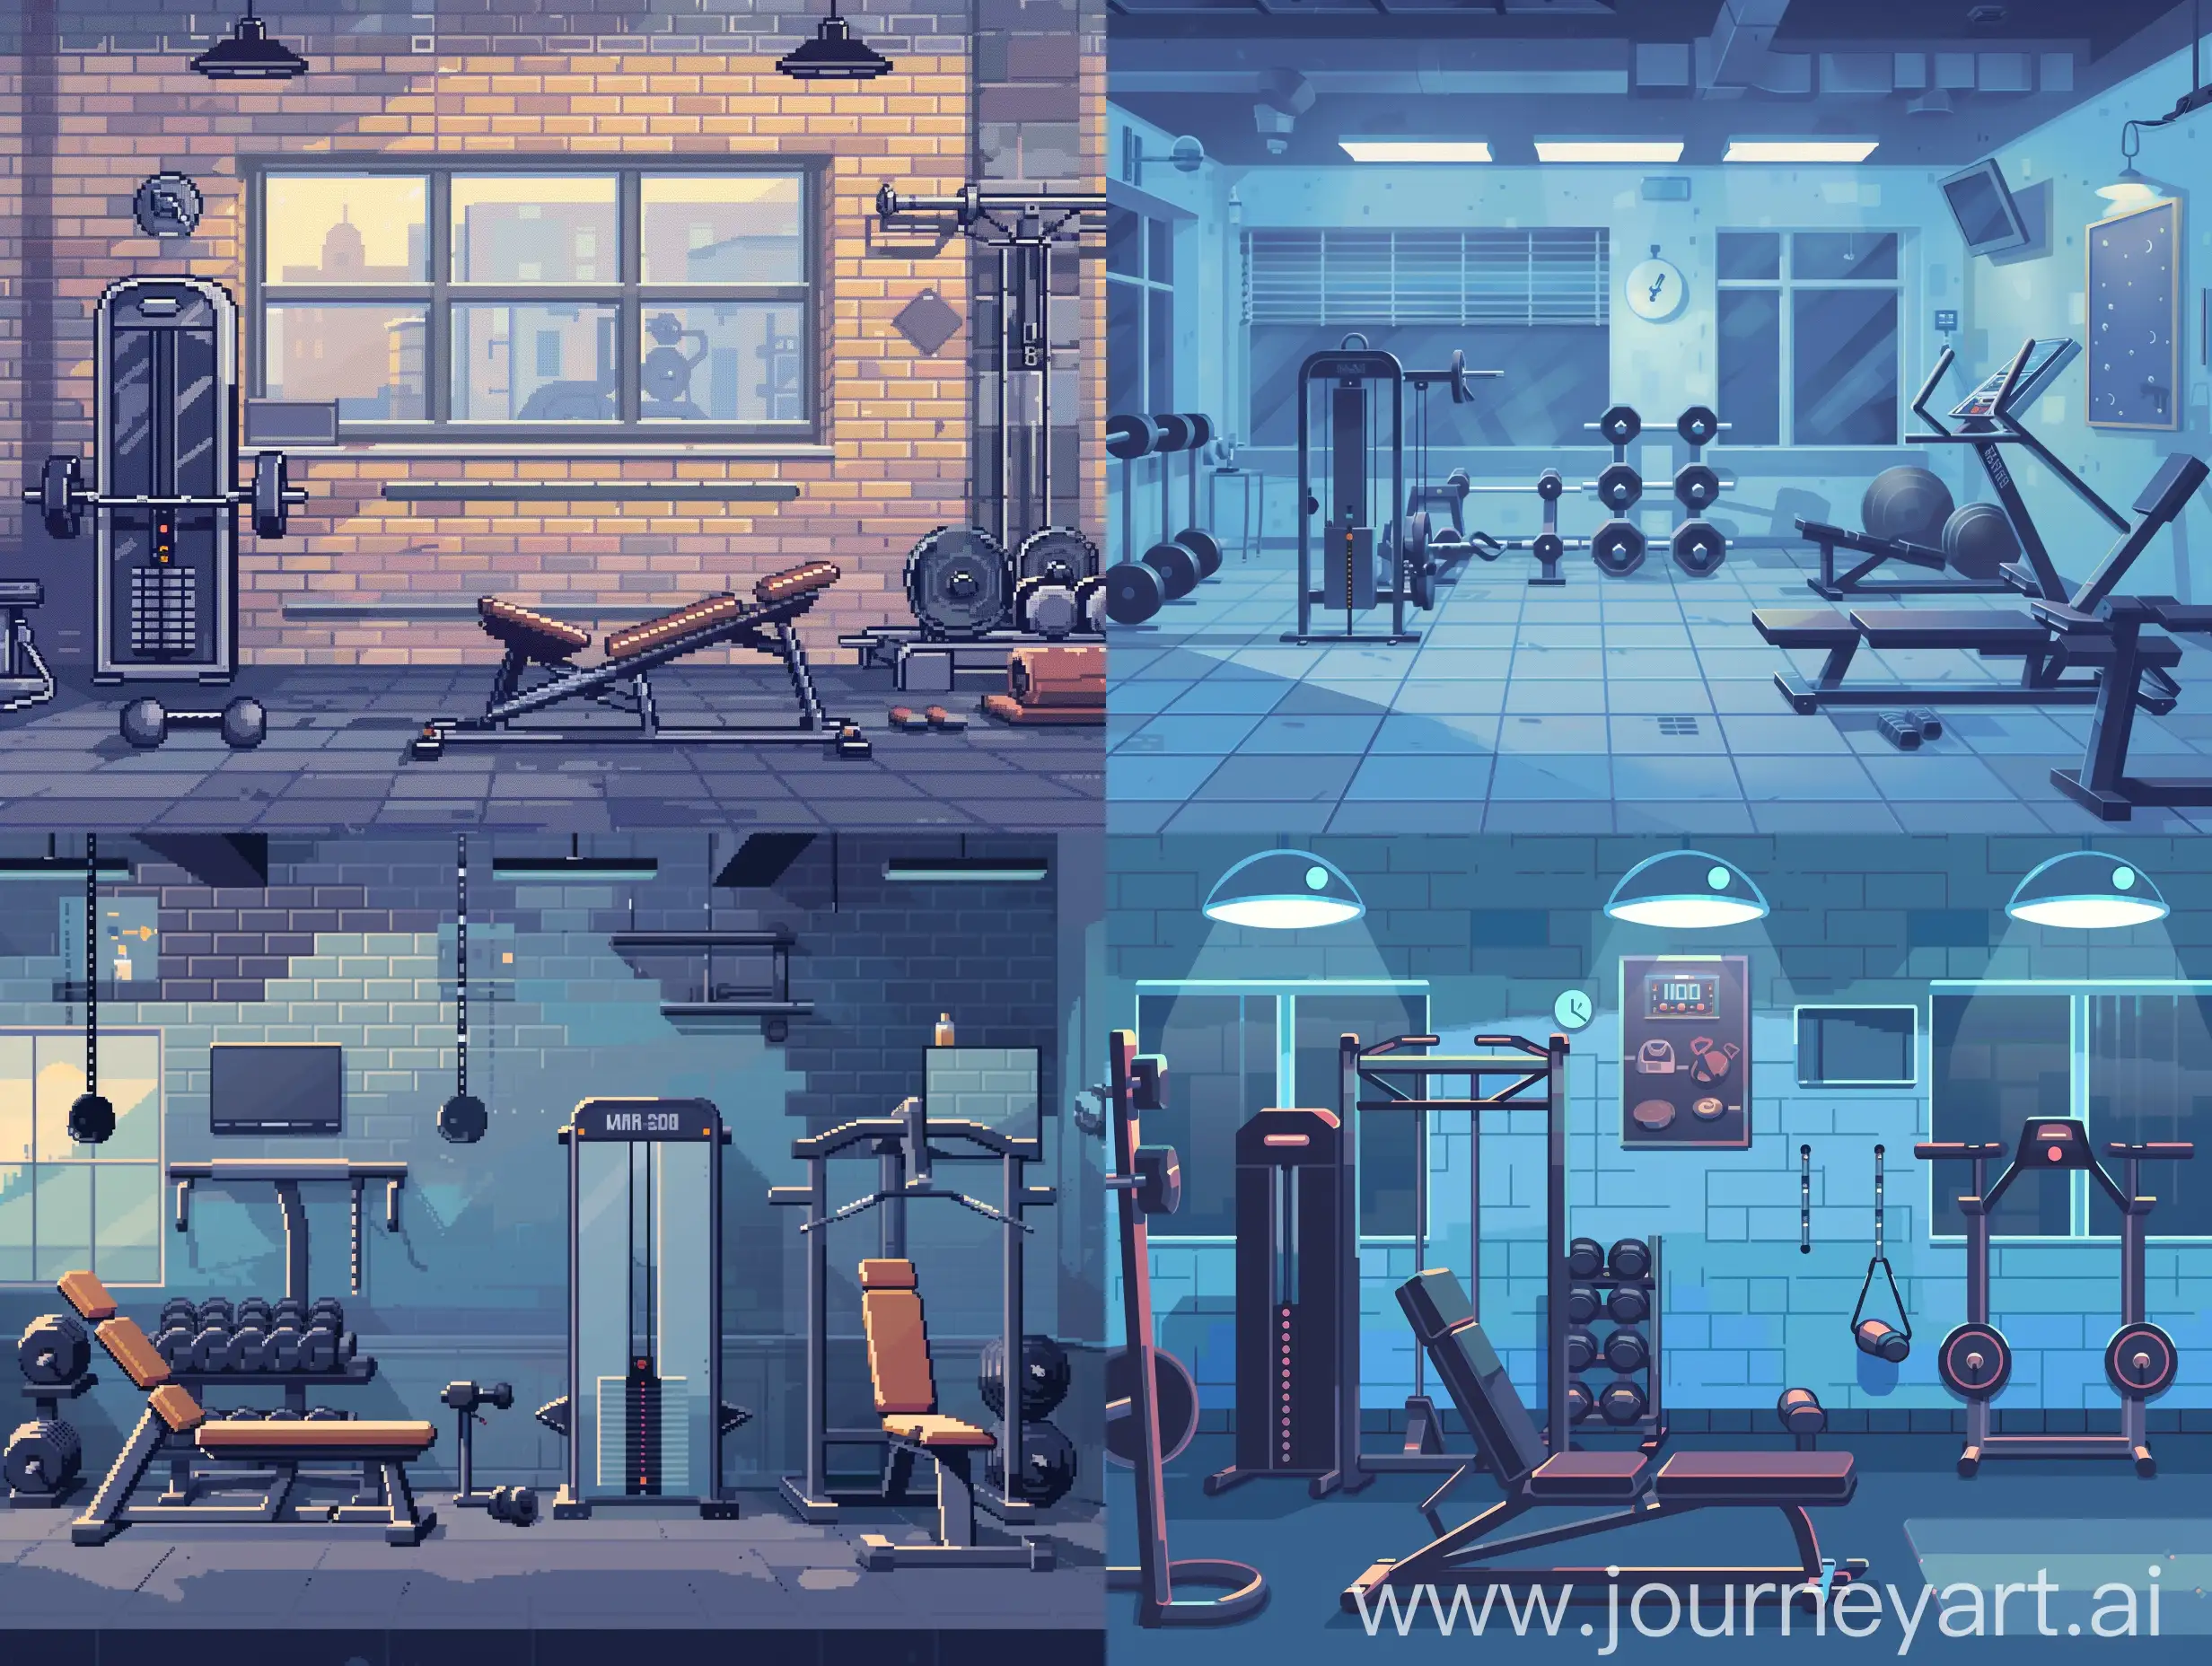 Pixelated-Gym-Interior-with-Vibrant-Colors-and-Retro-Style